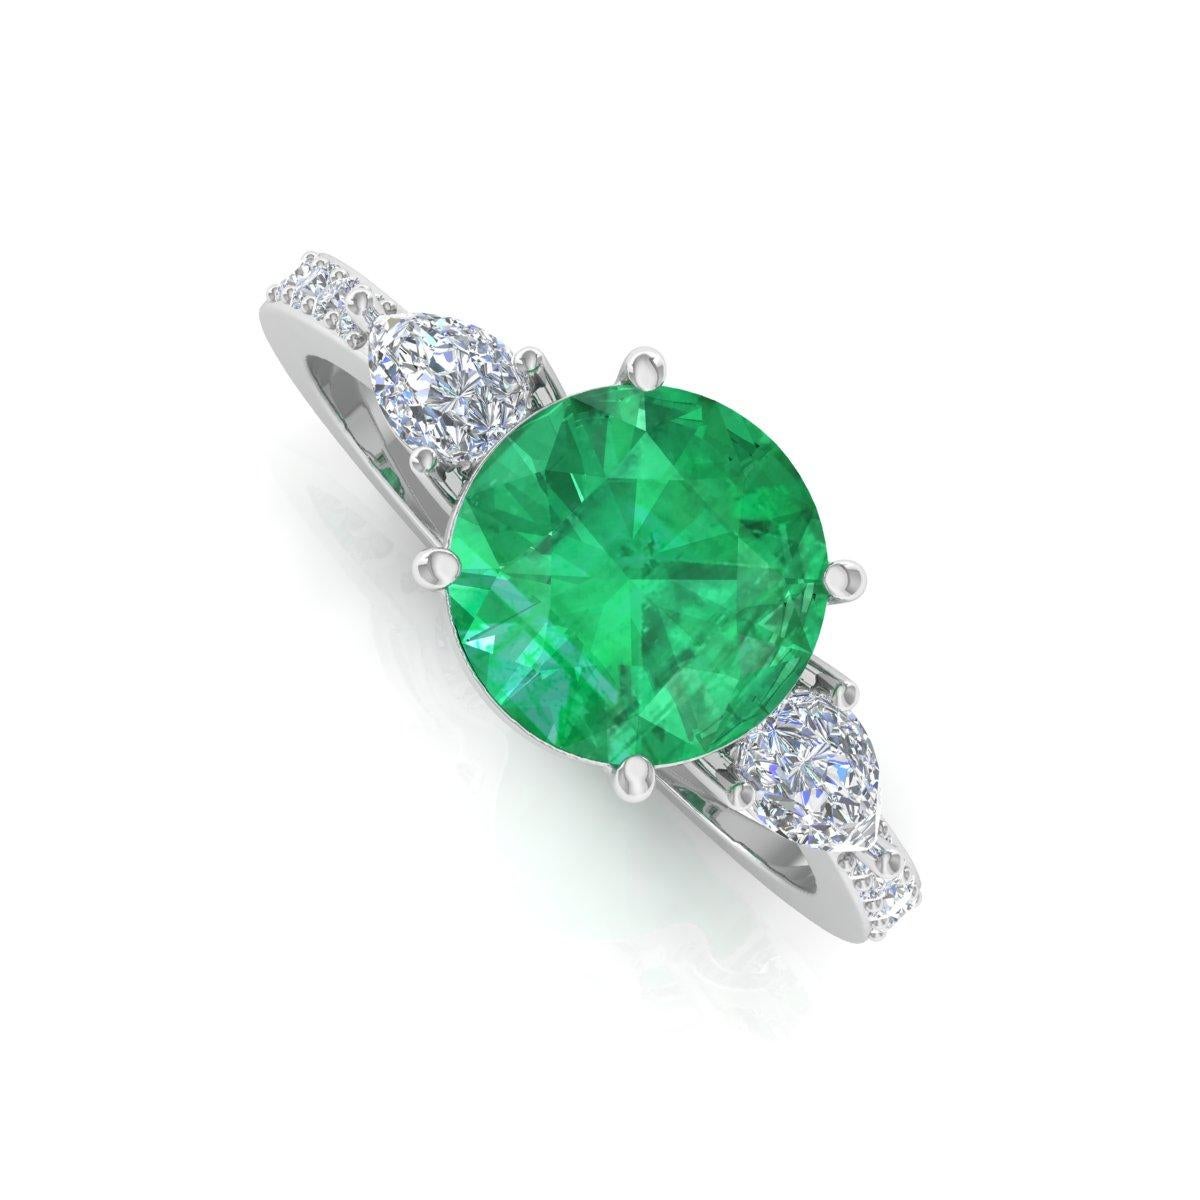 Round Cut Zambian Emerald Cocktail Ring Pear Diamond Solid 14k White Gold Handmade Jewelry For Sale